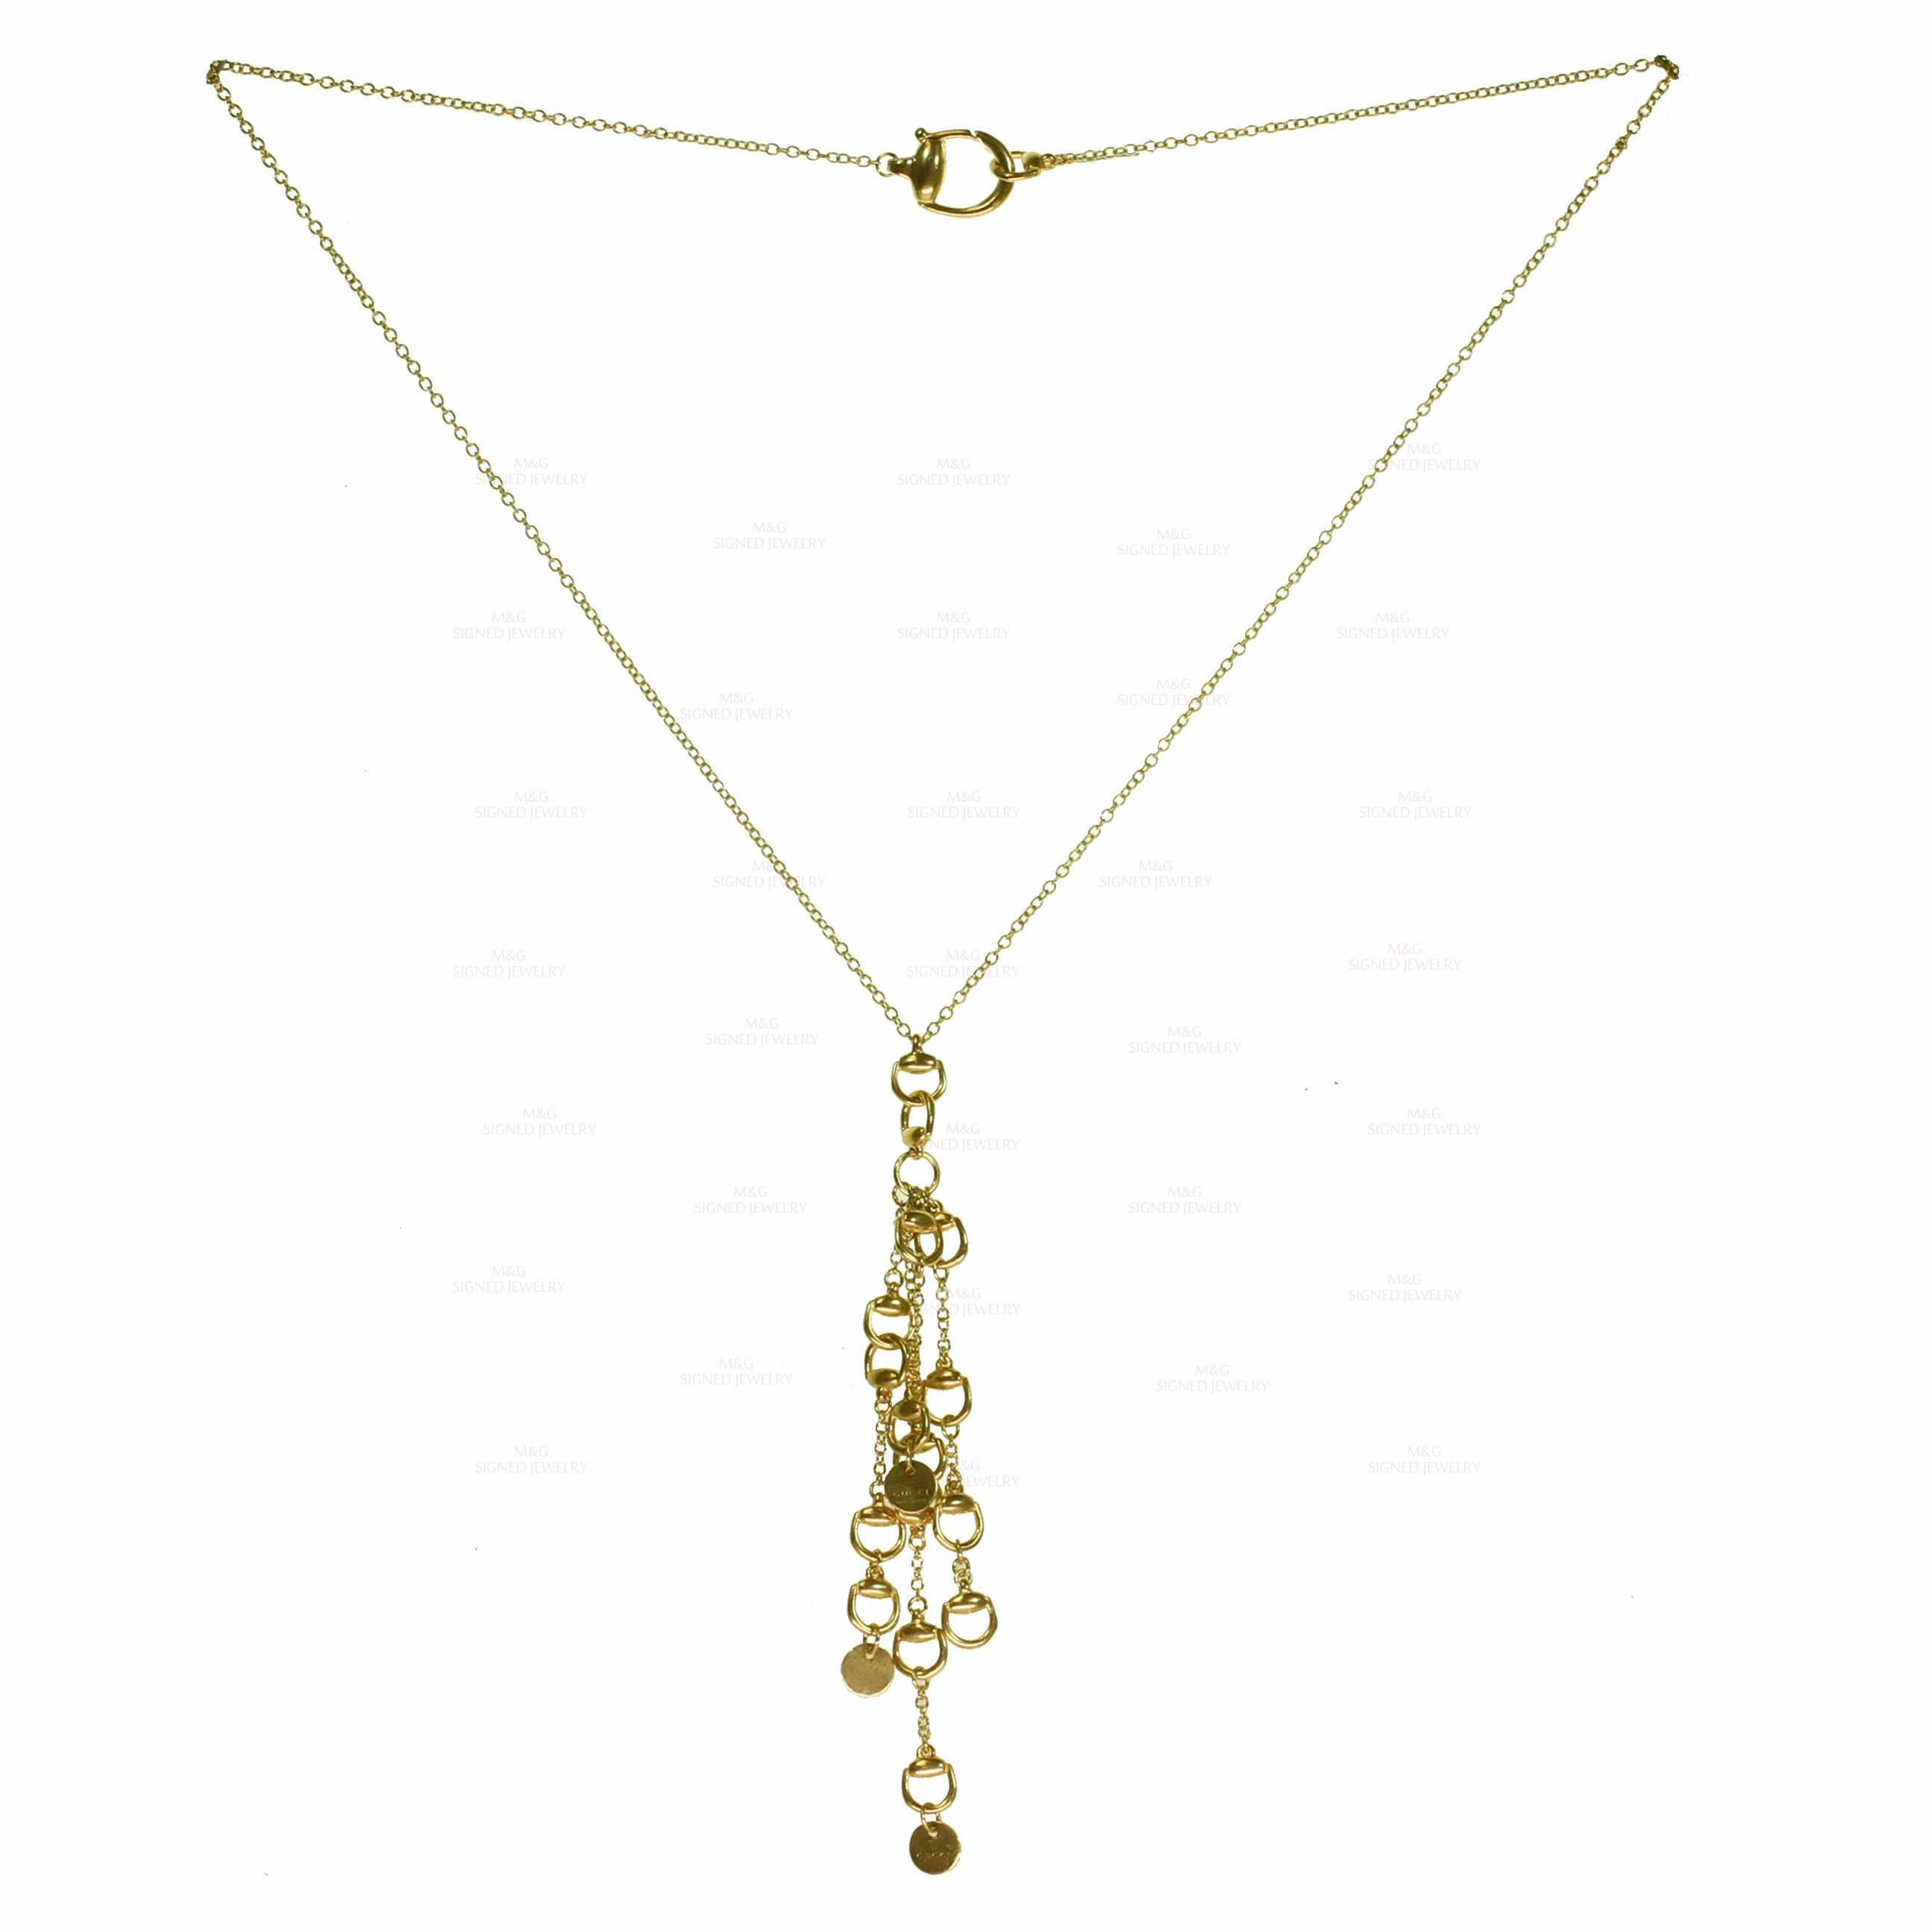 Gucci Horsebit Yellow Gold Necklace and Dangle Earrings Set 2